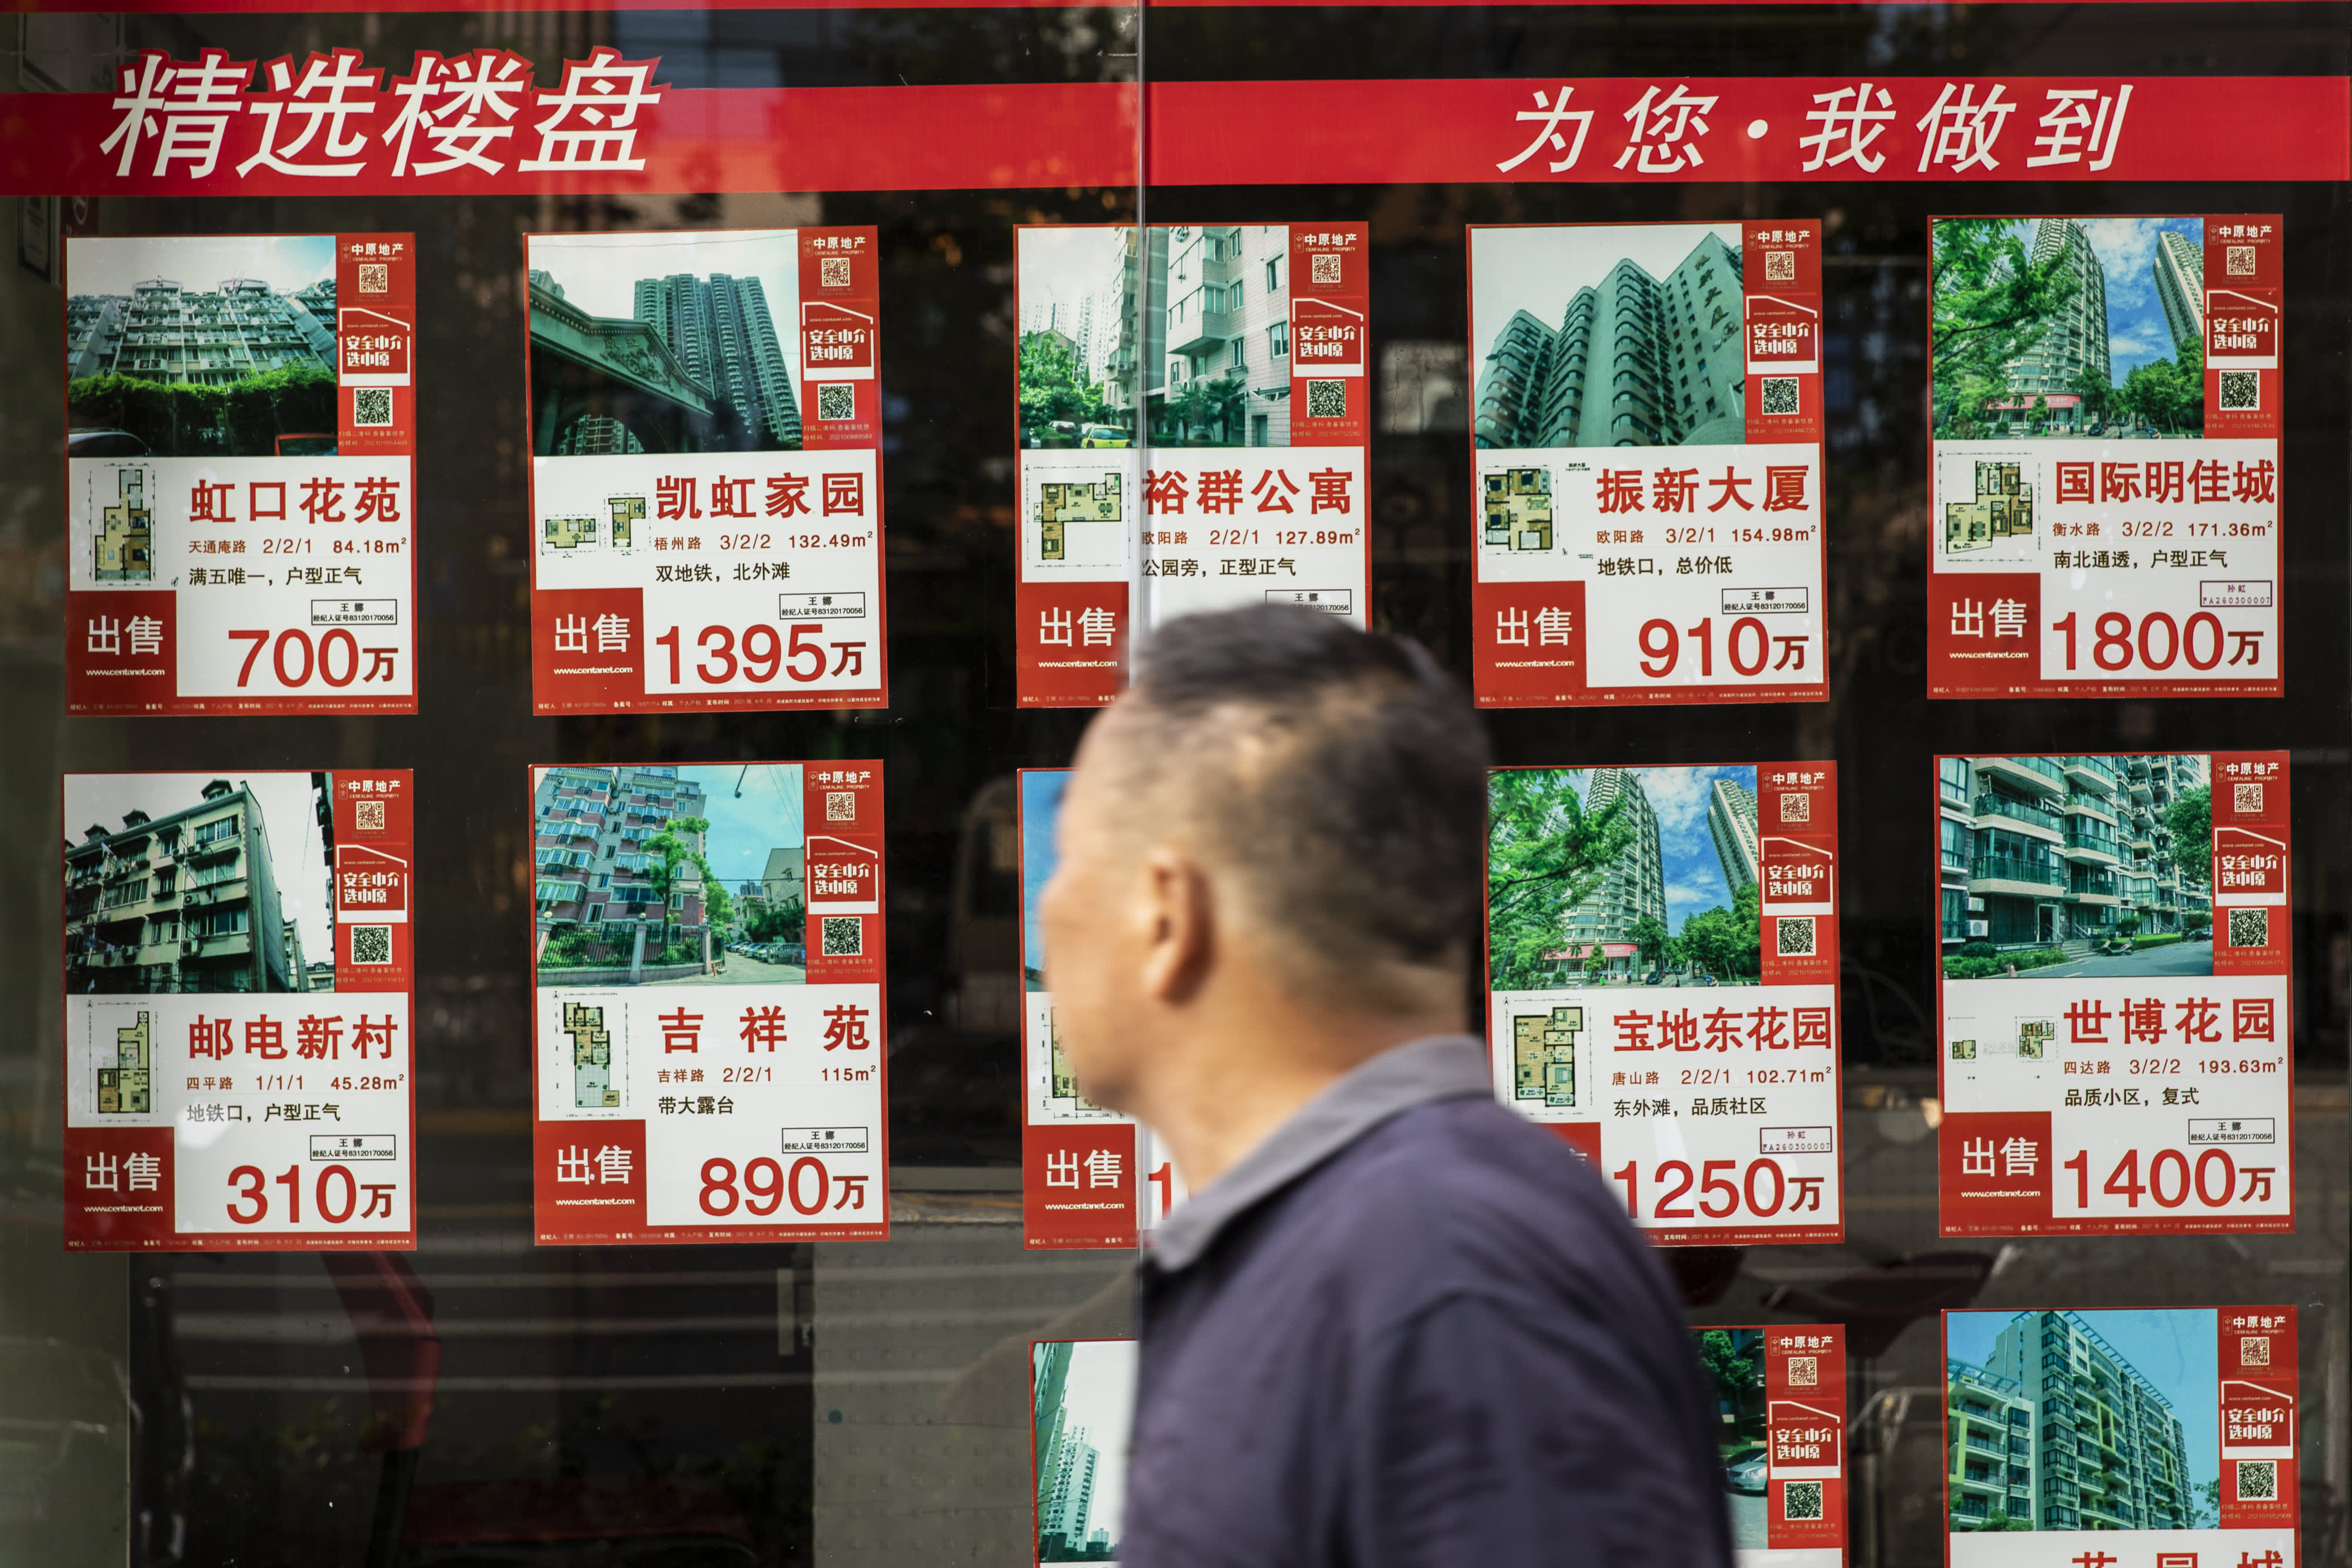 China’s real estate uncertainties persist, fueling market anxiety